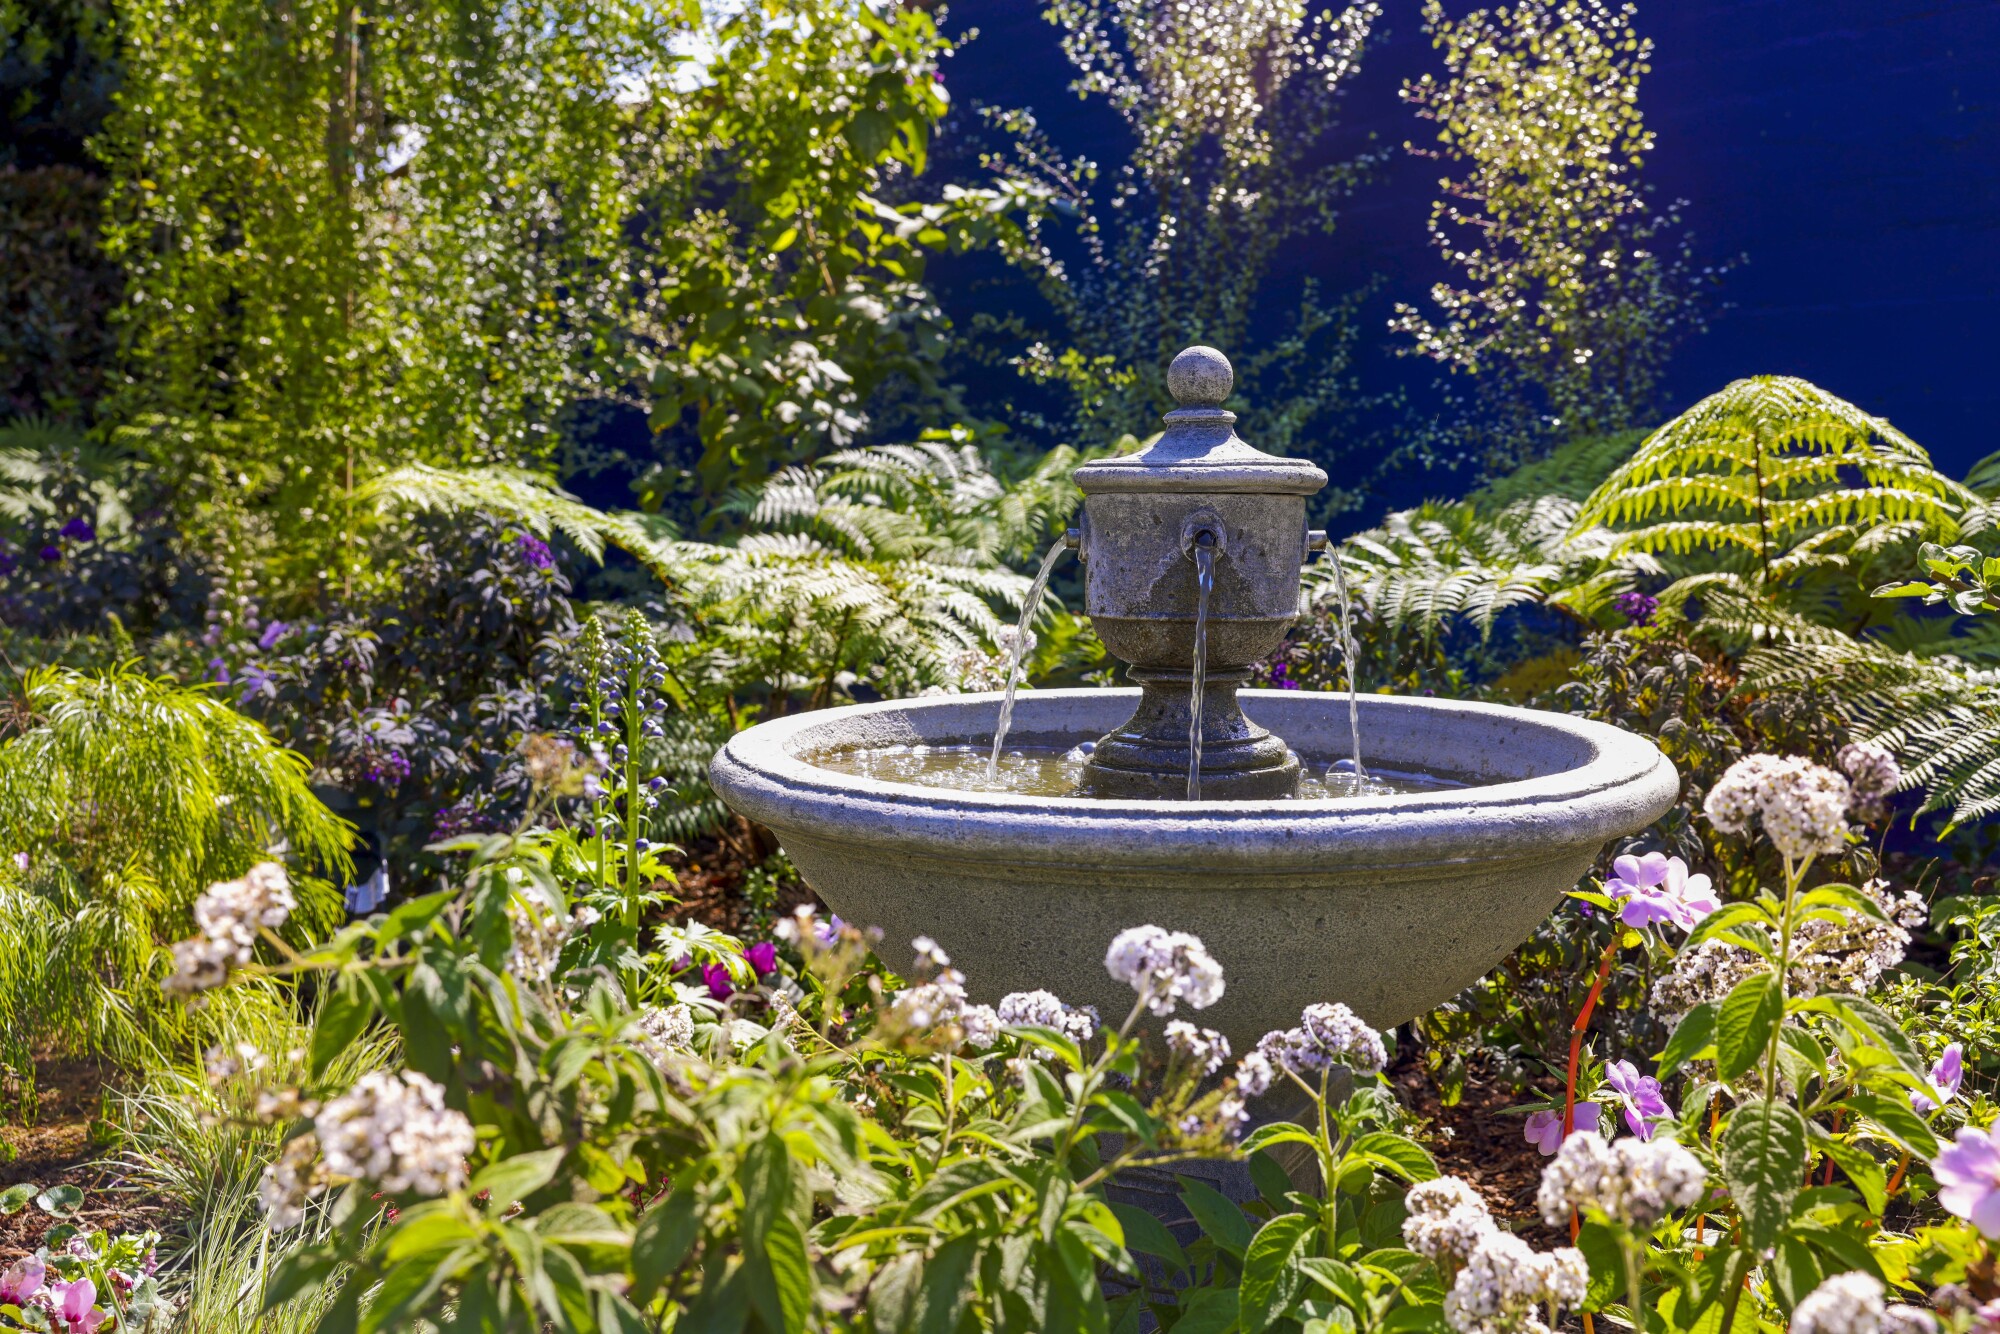 Water flows from a stone fountain surrounded by flowers.